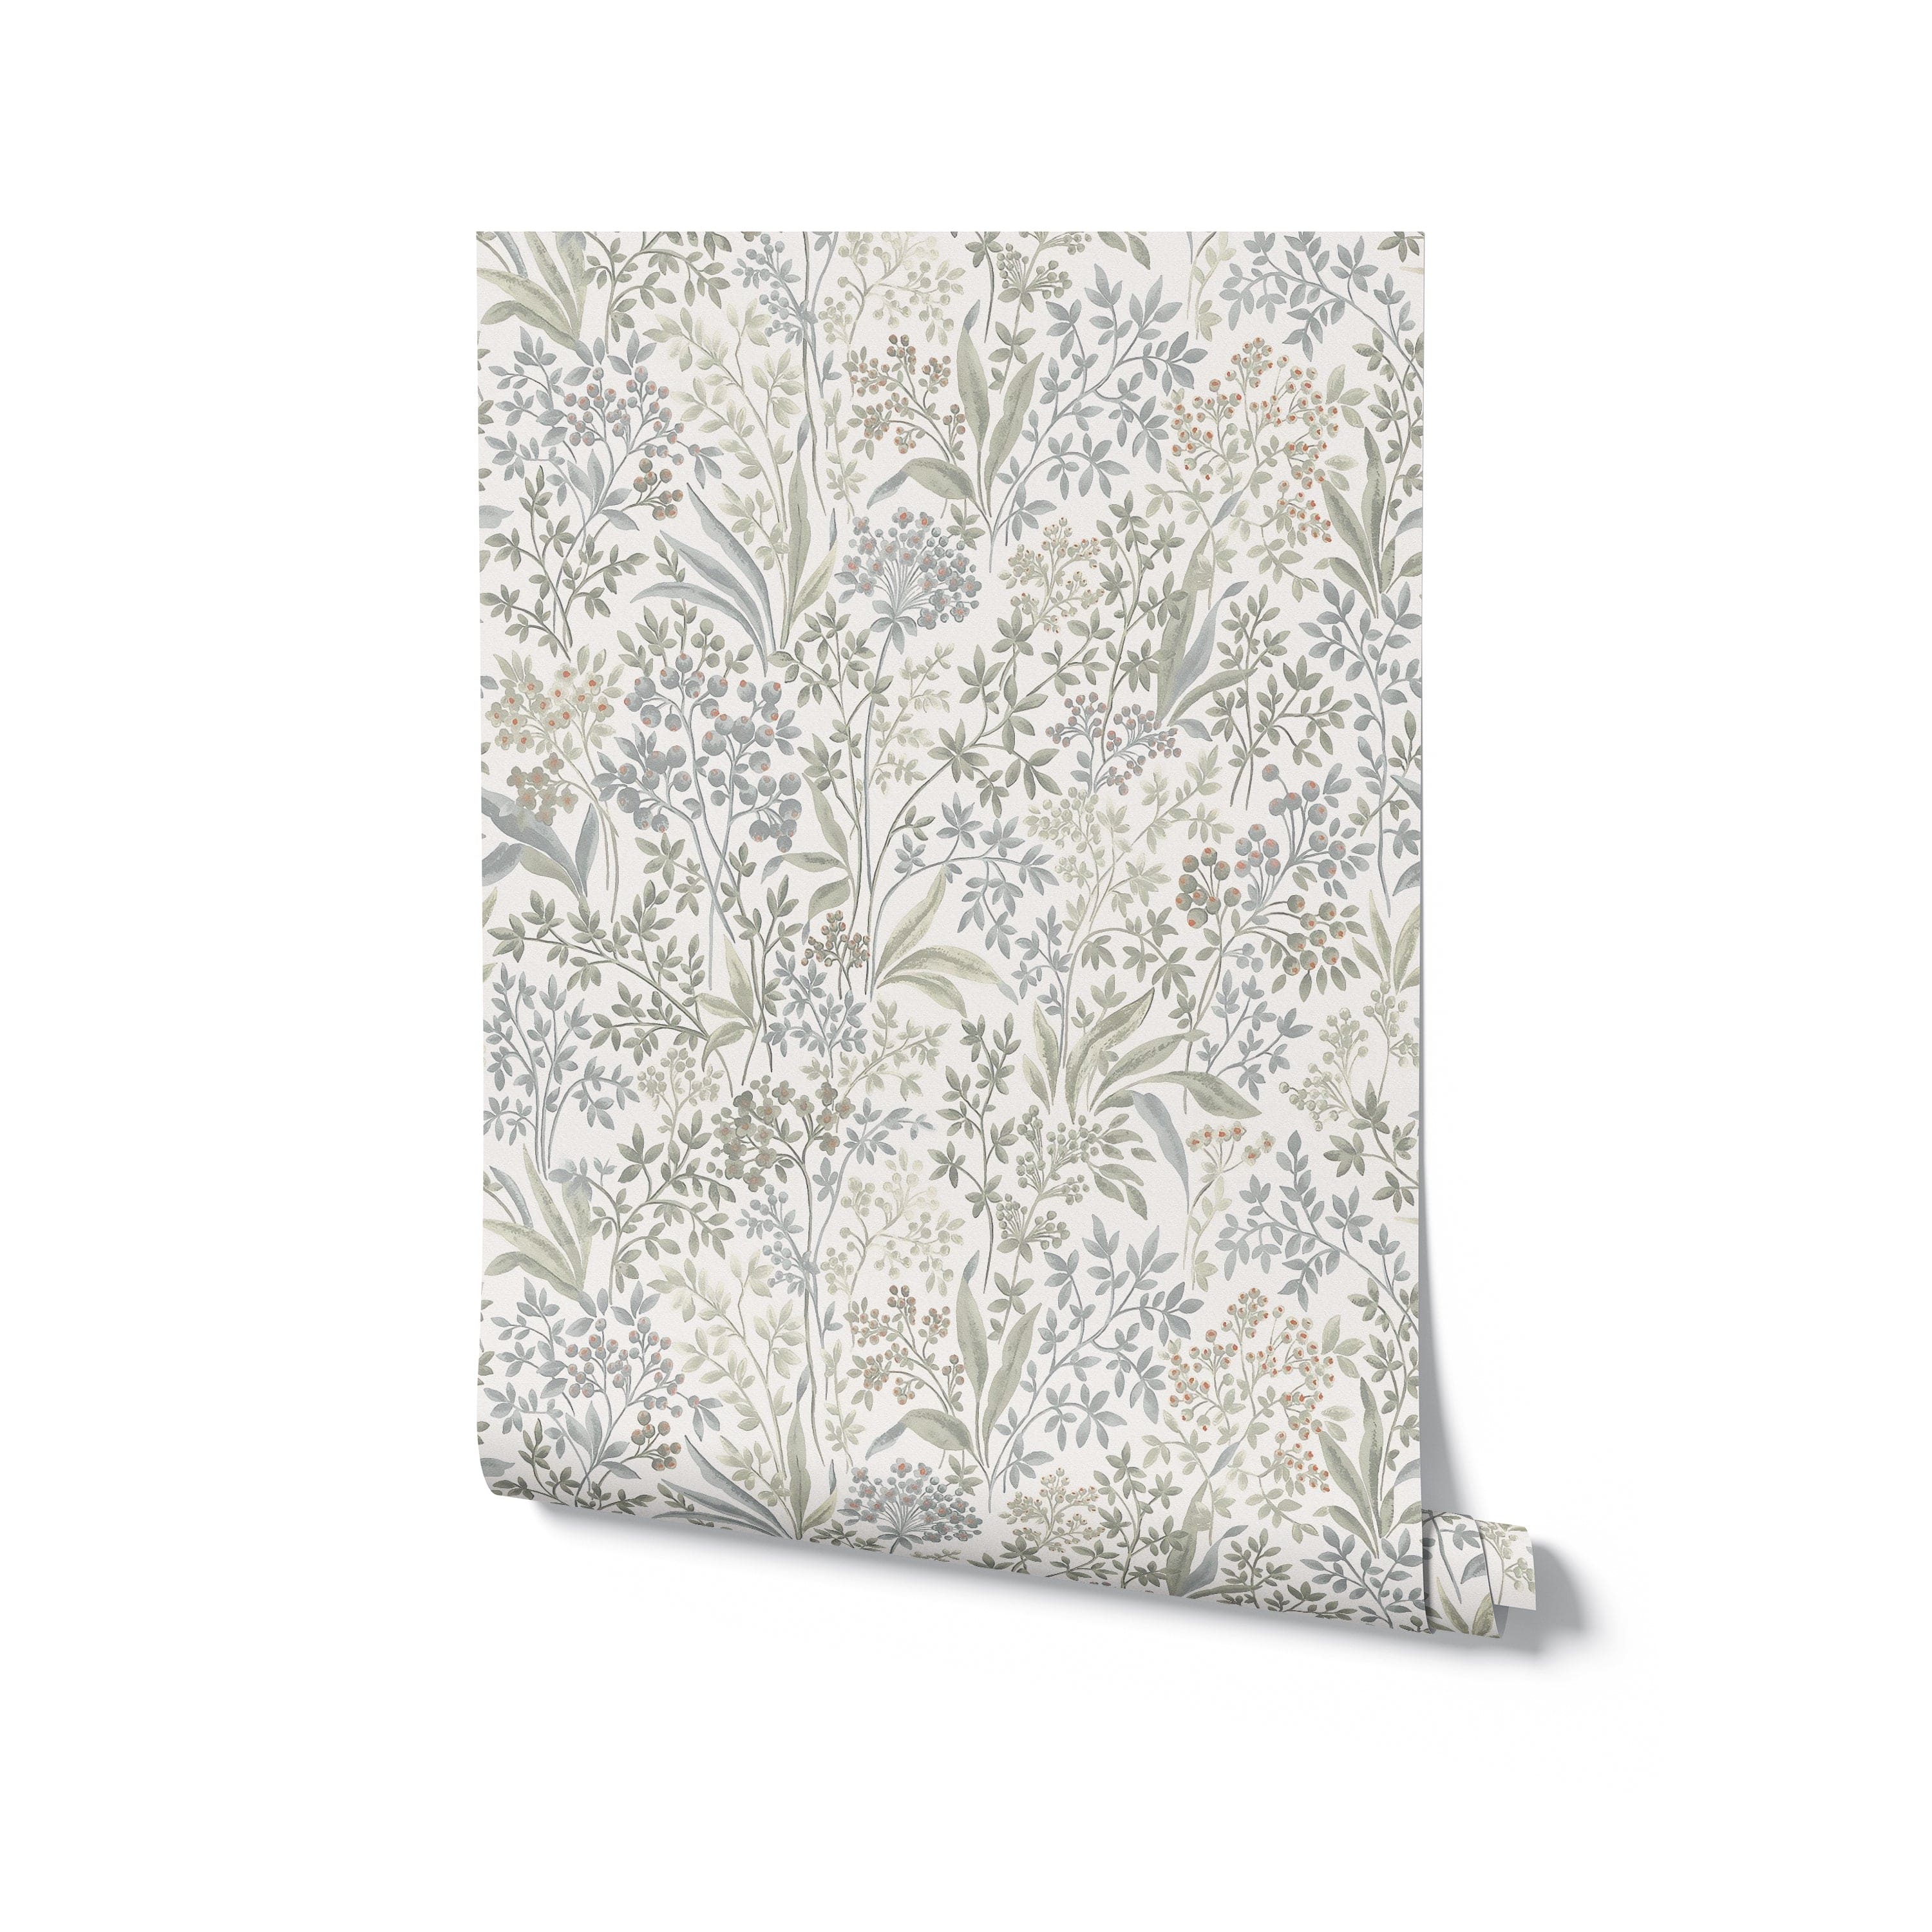 A roll of Harmony in Bloom Wallpaper showcasing a detailed and delicate pattern of various botanical elements in soft shades of green, gray, and blue on a neutral background. This wallpaper brings a subtle and sophisticated floral elegance to any space